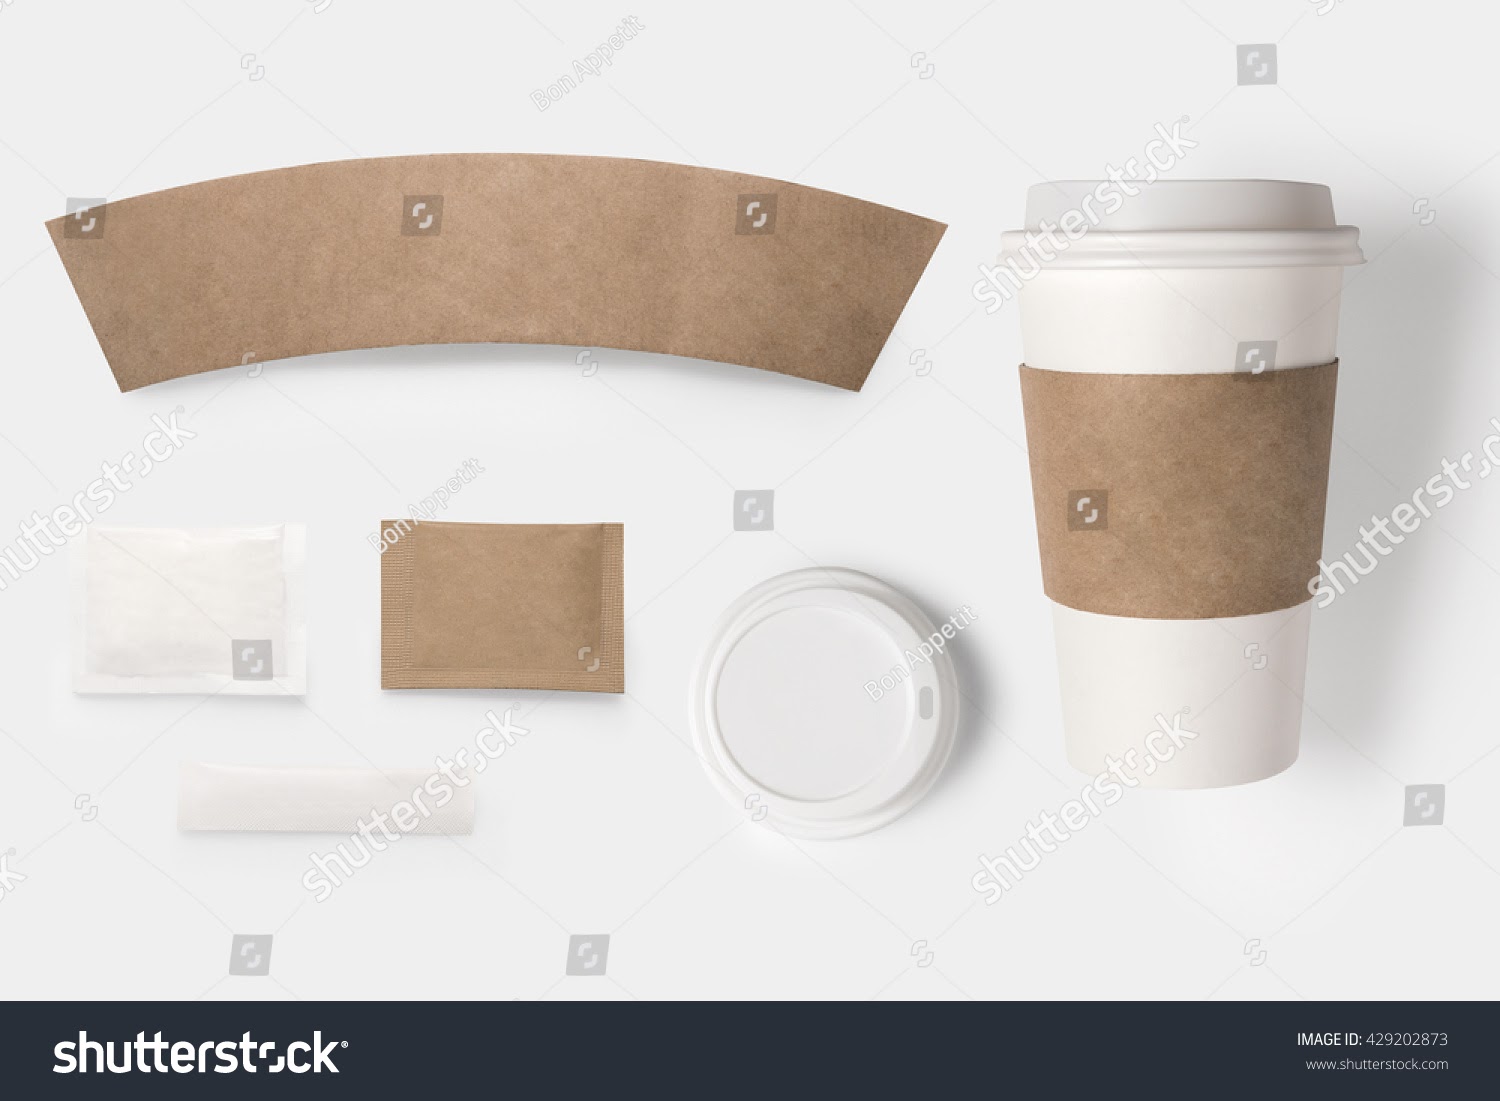 Download Free 6414+ Cup Holder Mockup Yellowimages Mockups free packaging mockups from the trusted websites.